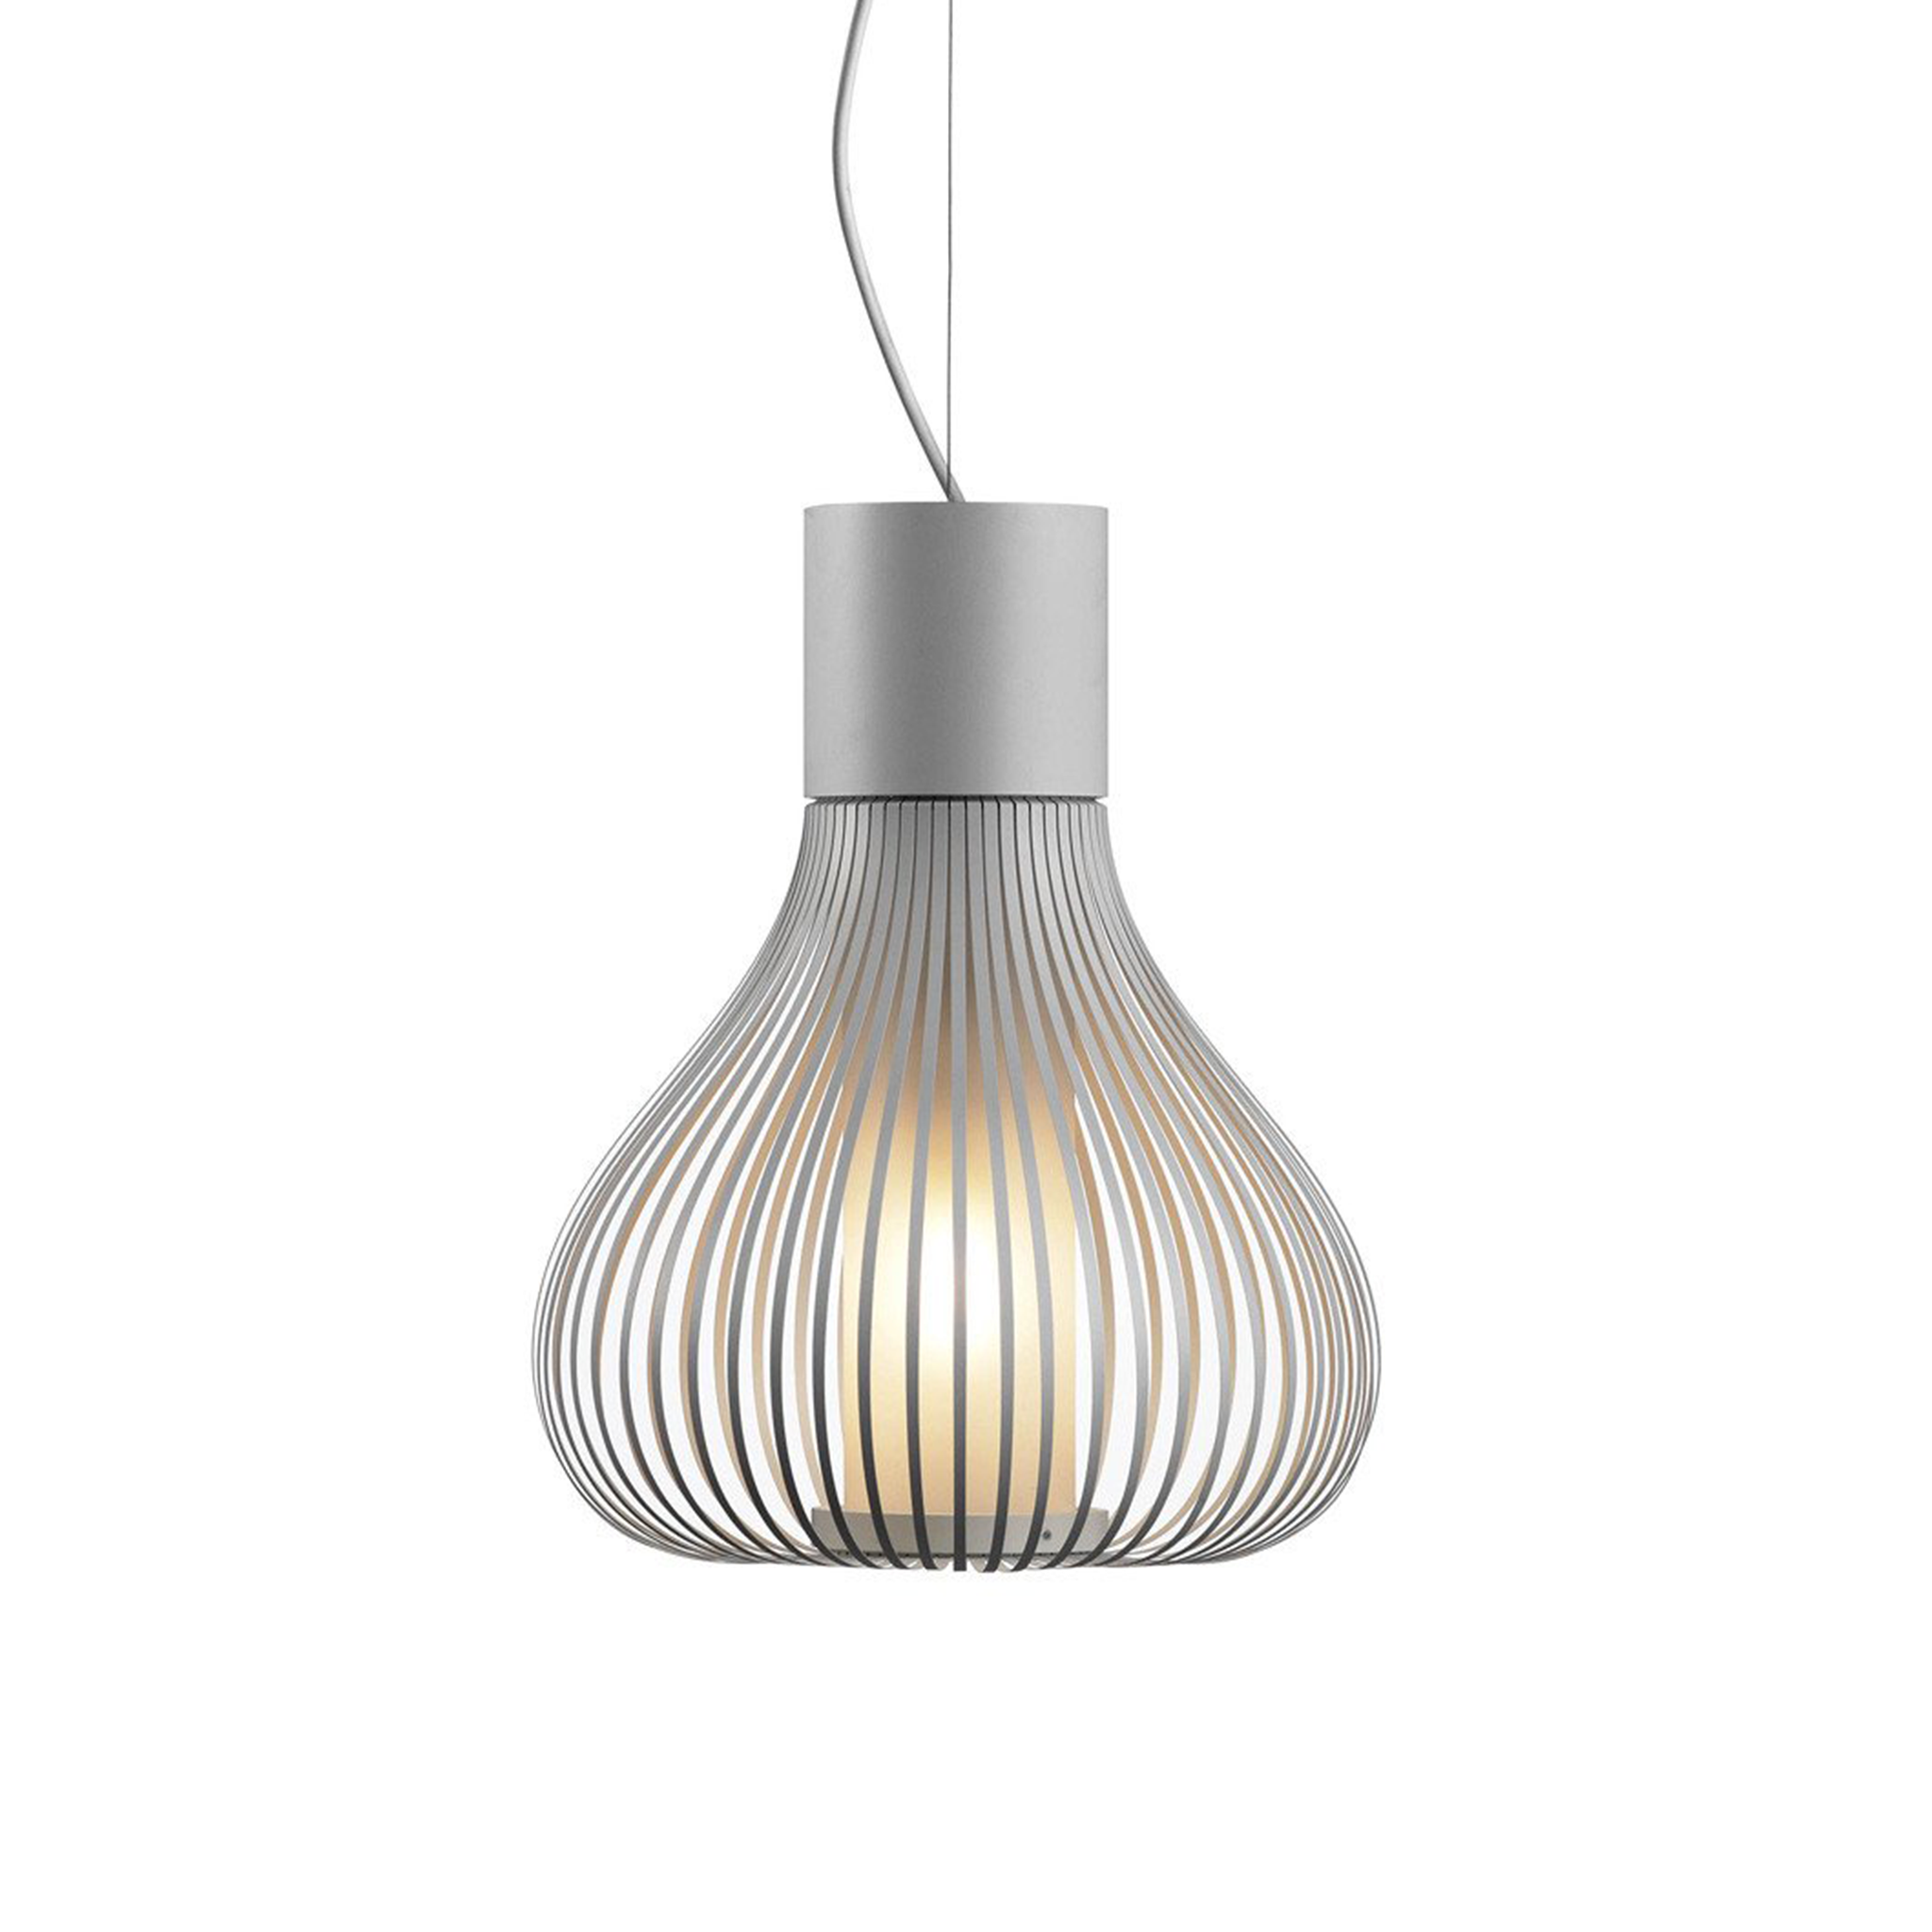 Chasen Suspension light by Patricia Urquiola for Flos